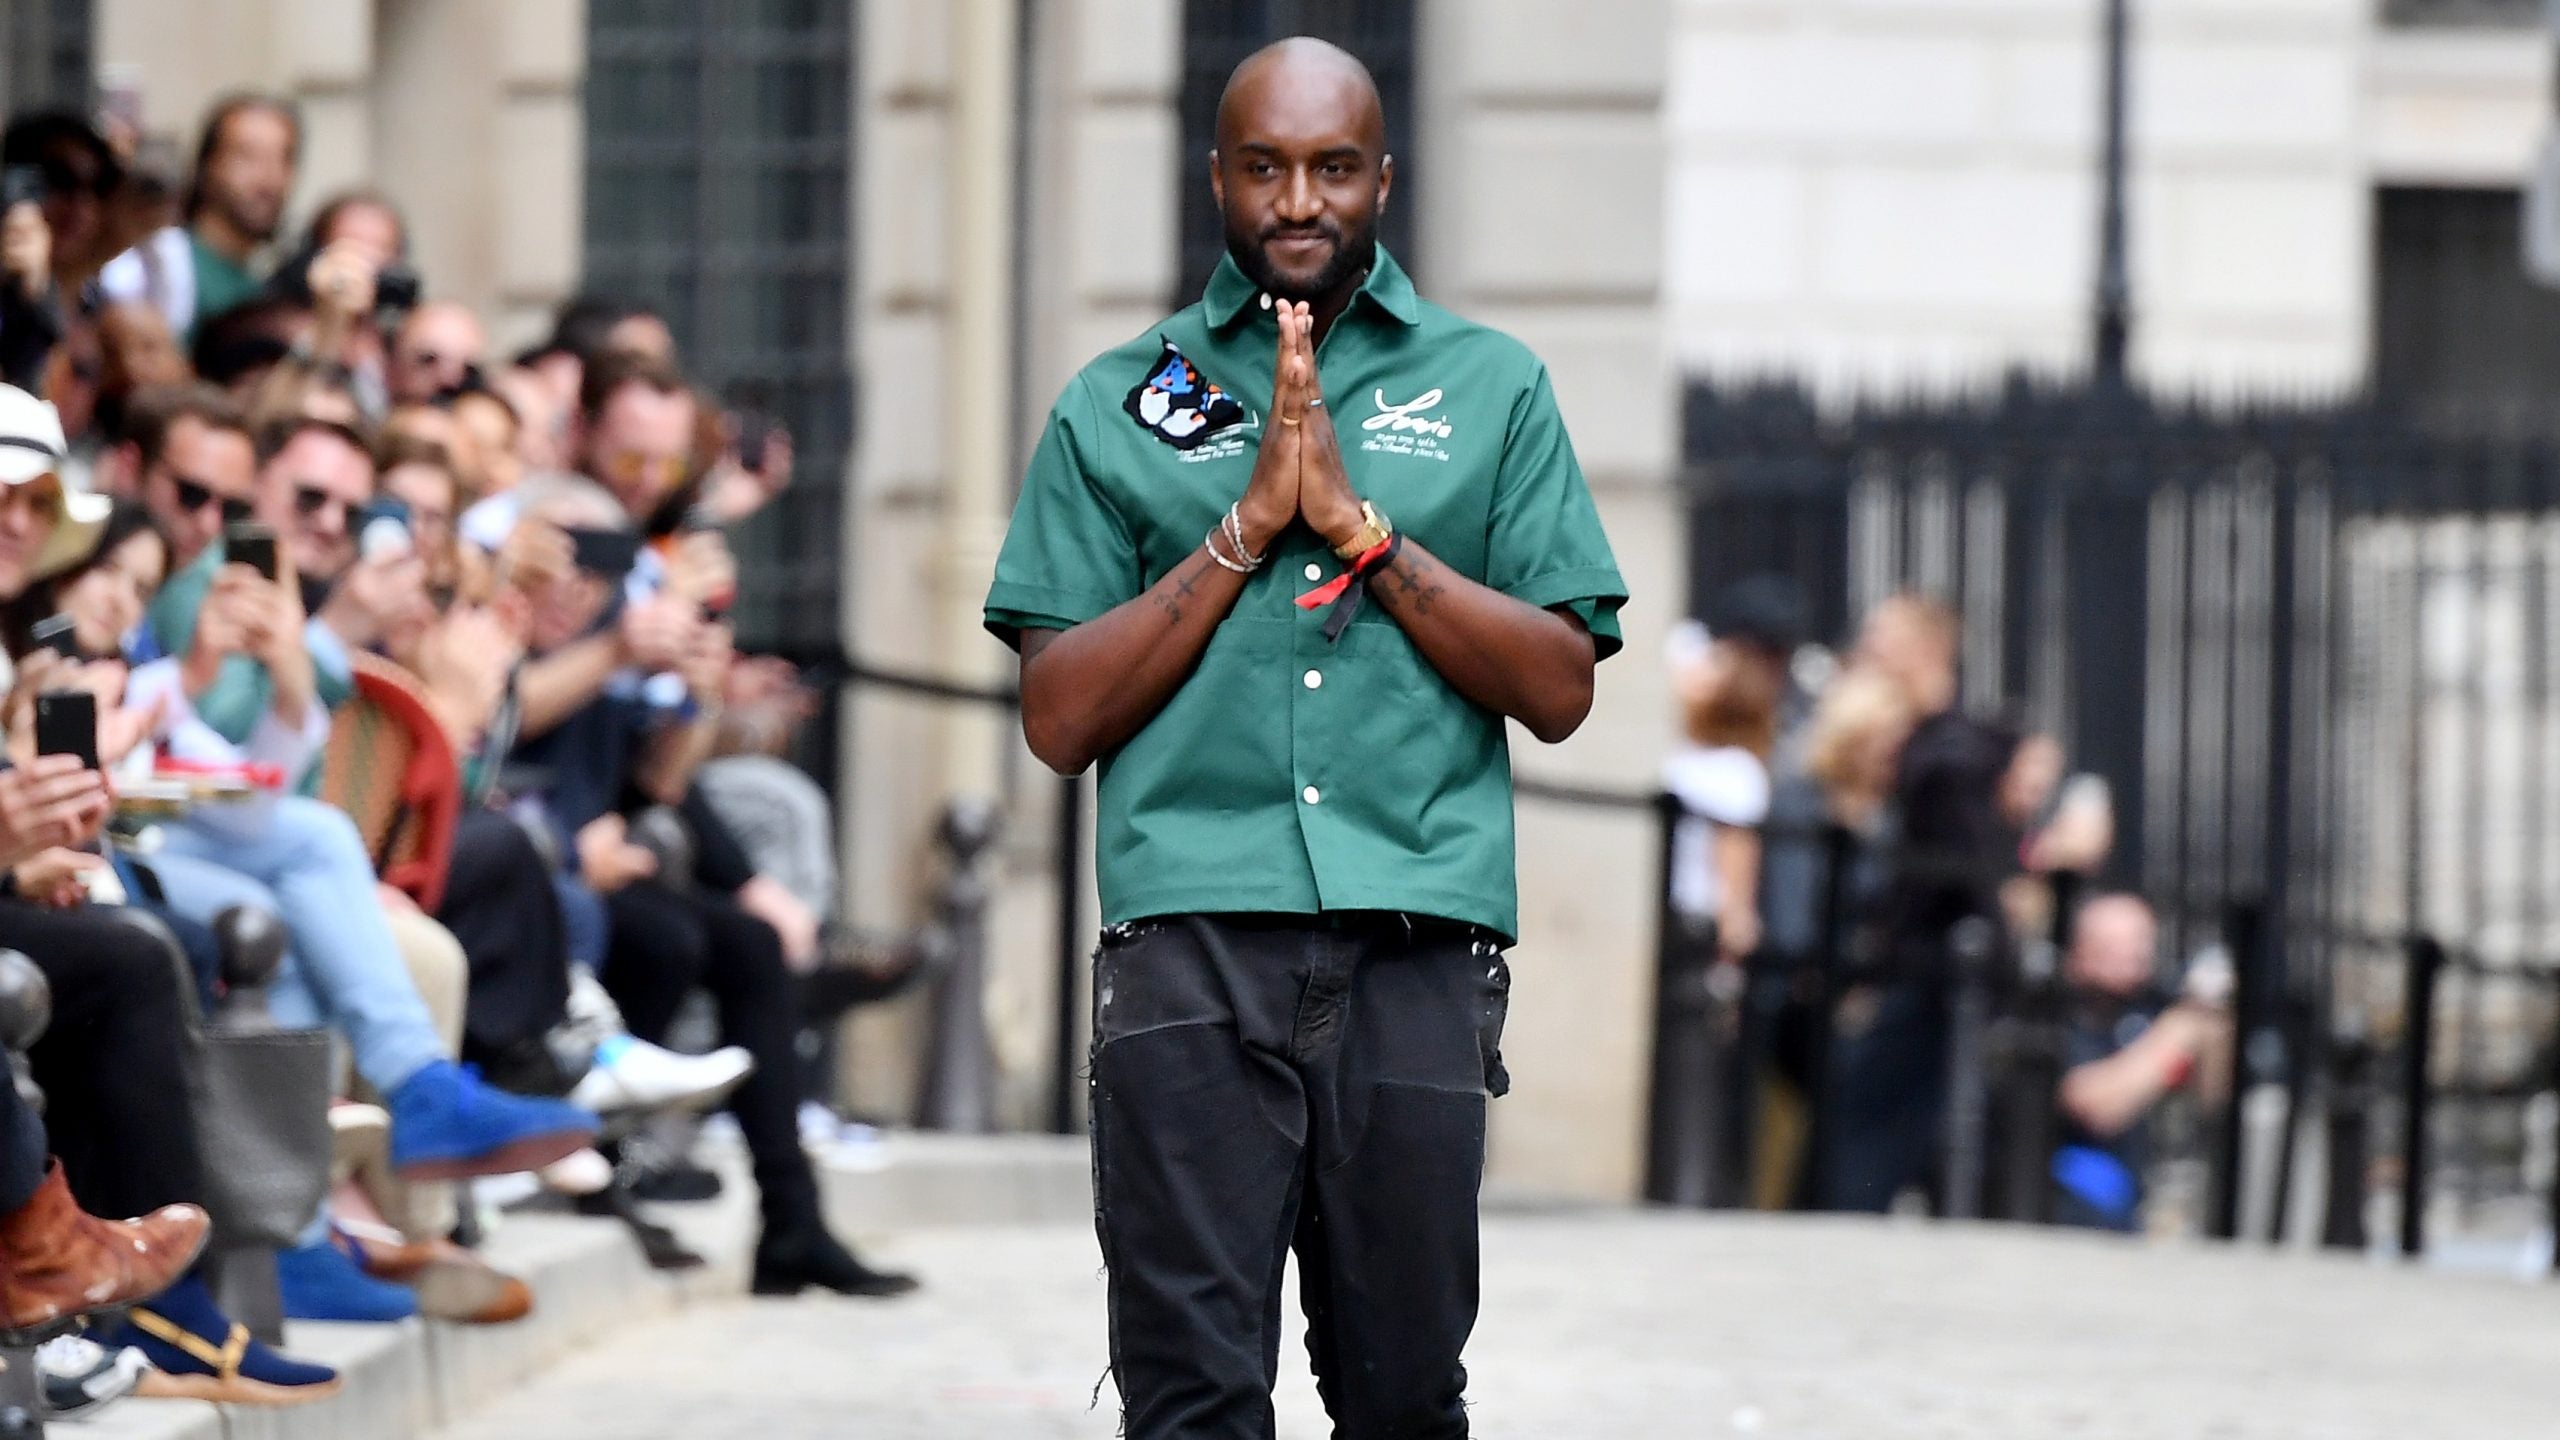 The Living Legacy of Virgil Abloh, Changemaker and Creative Force at Louis  Vuitton, Handbags and Accessories